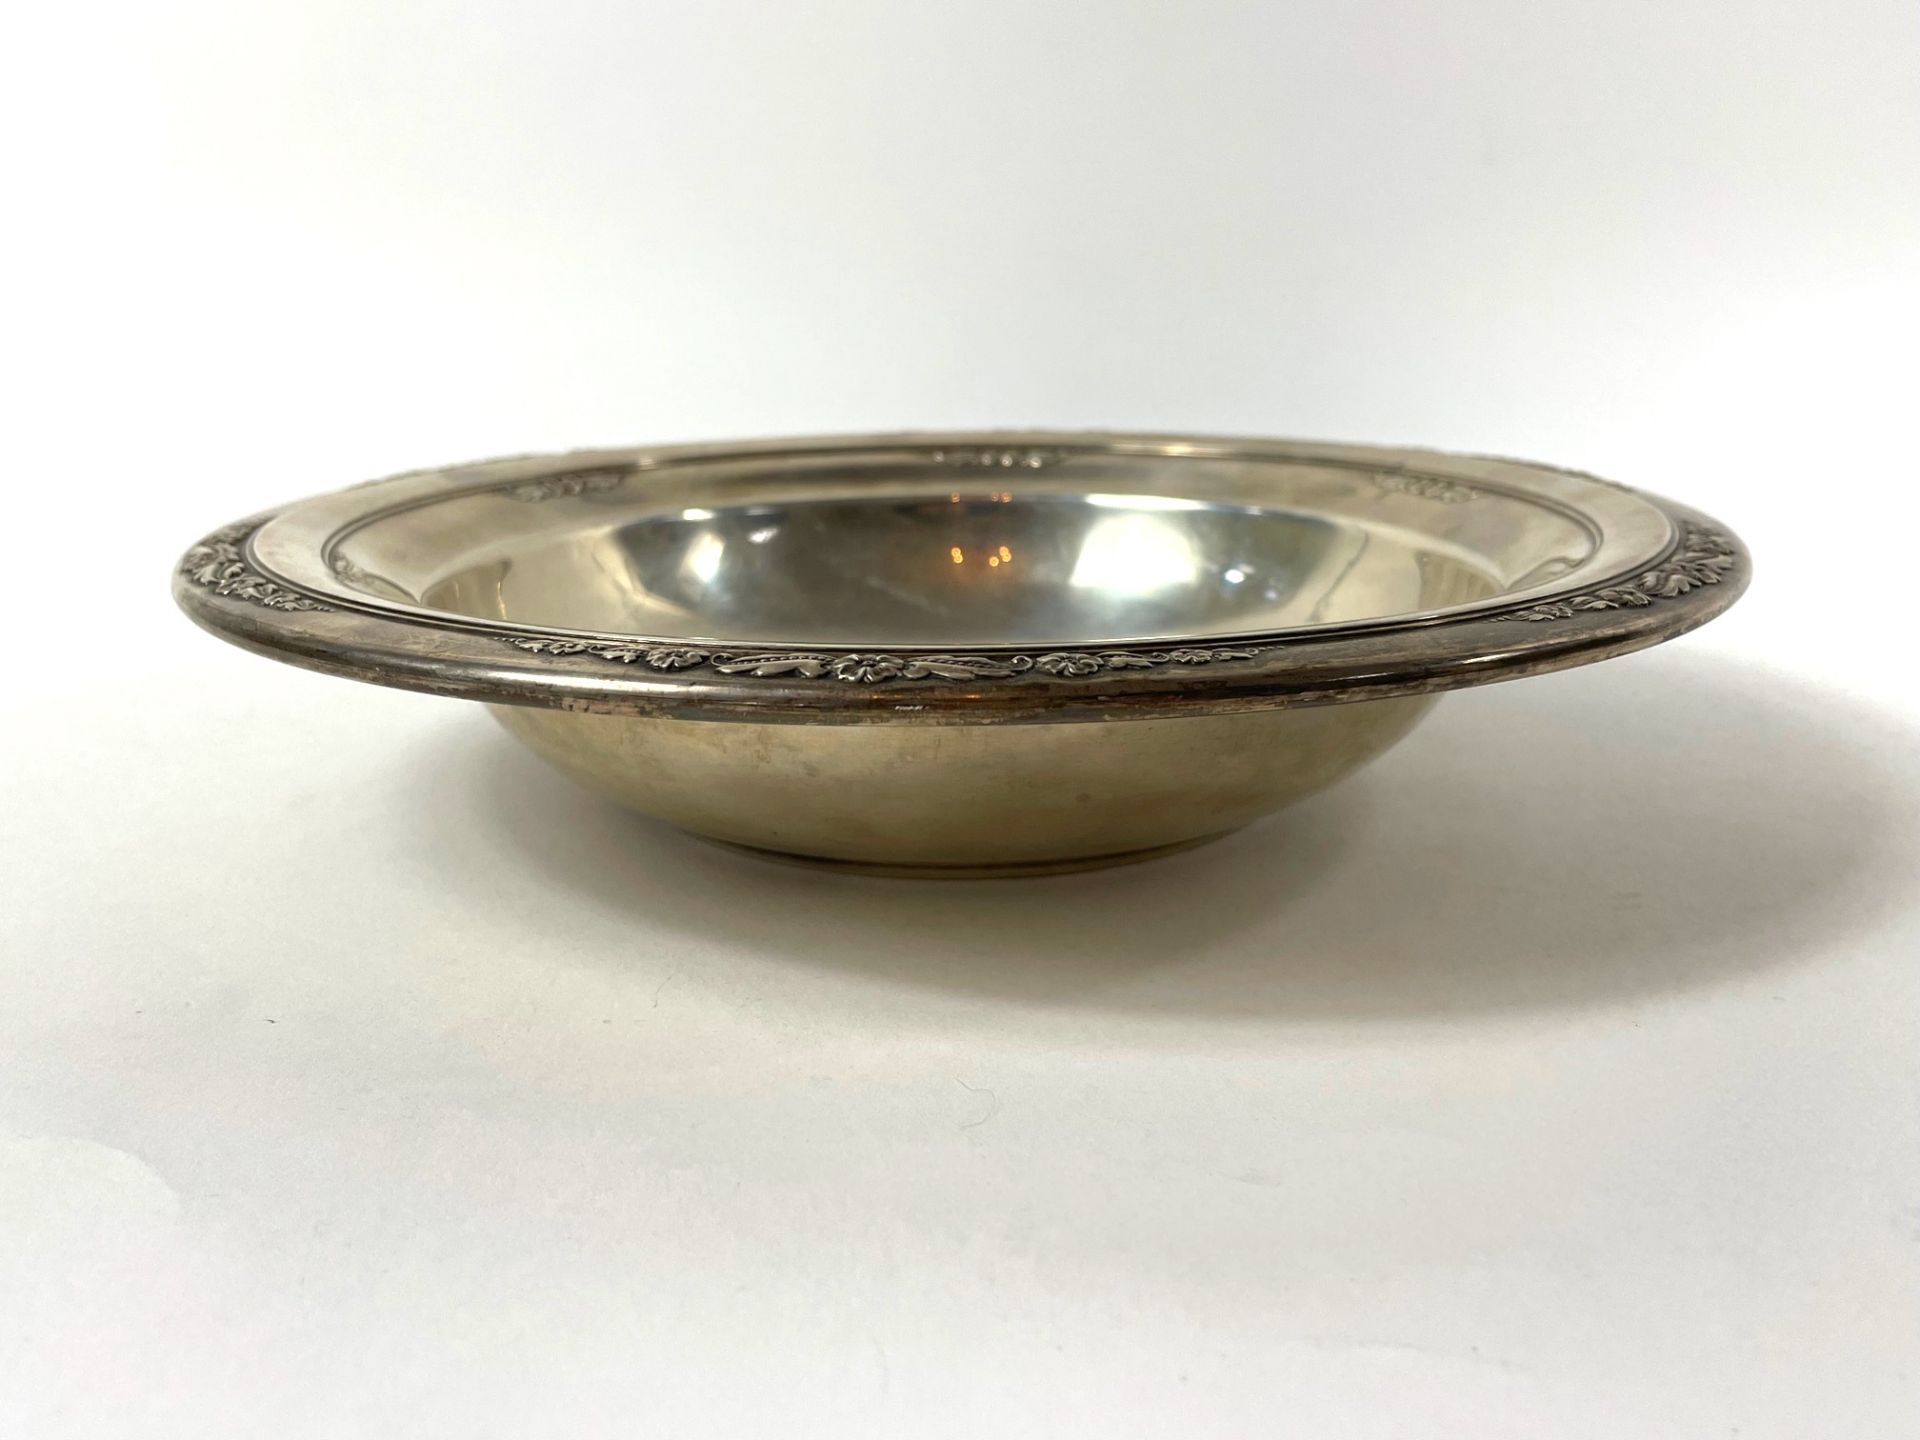 Bowl in 925 silver with floral decoration